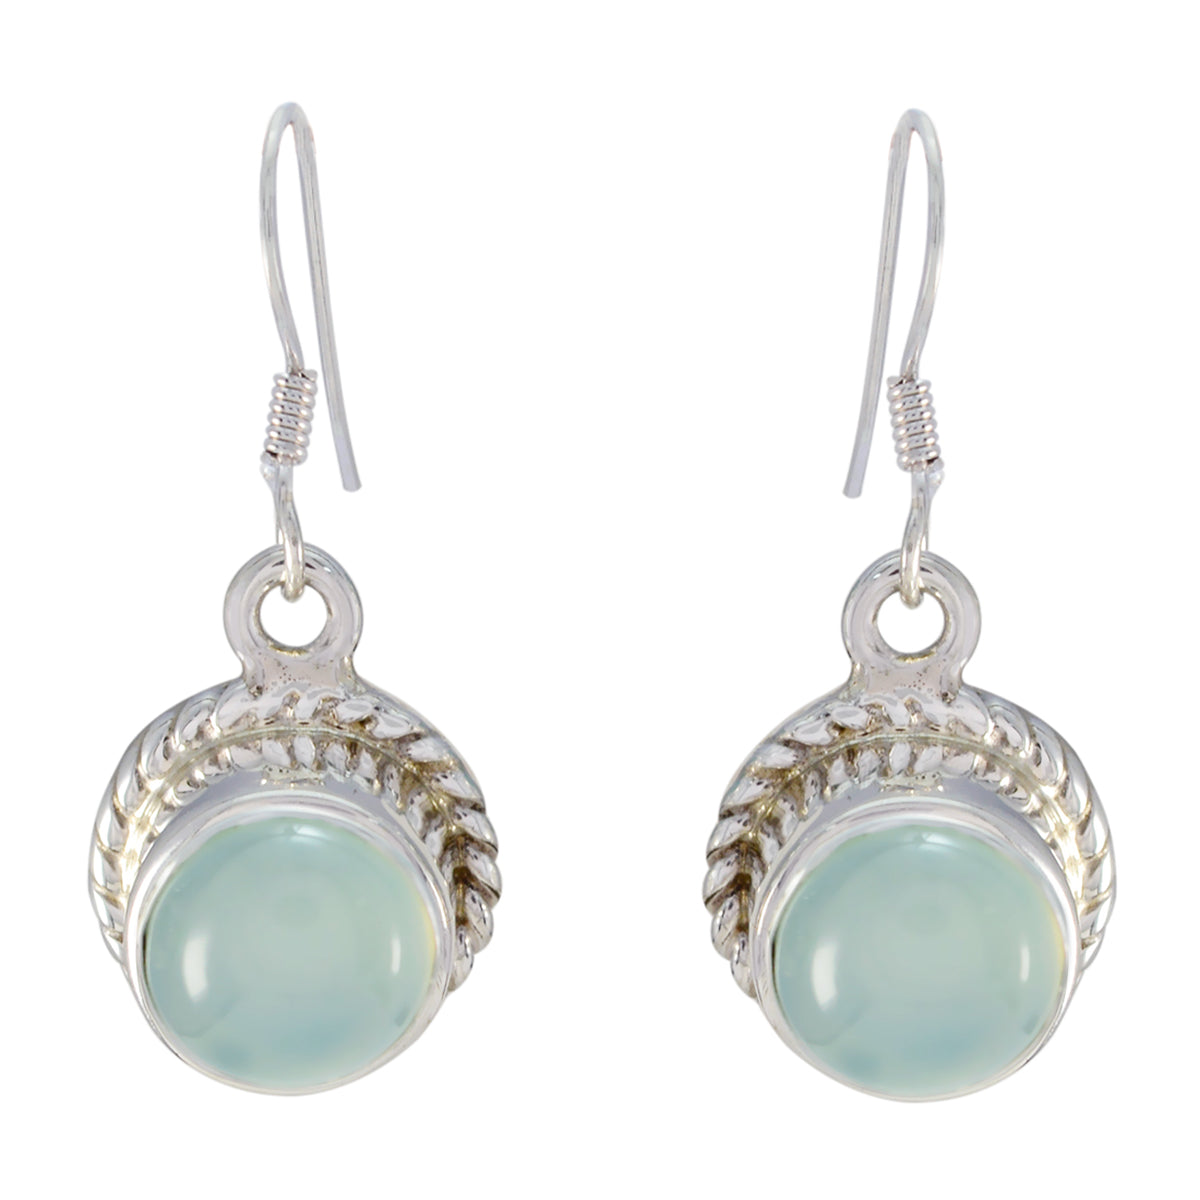 Riyo Genuine Gems round Cabochon Blue Chalcedony Silver Earrings gift for st. patricks day